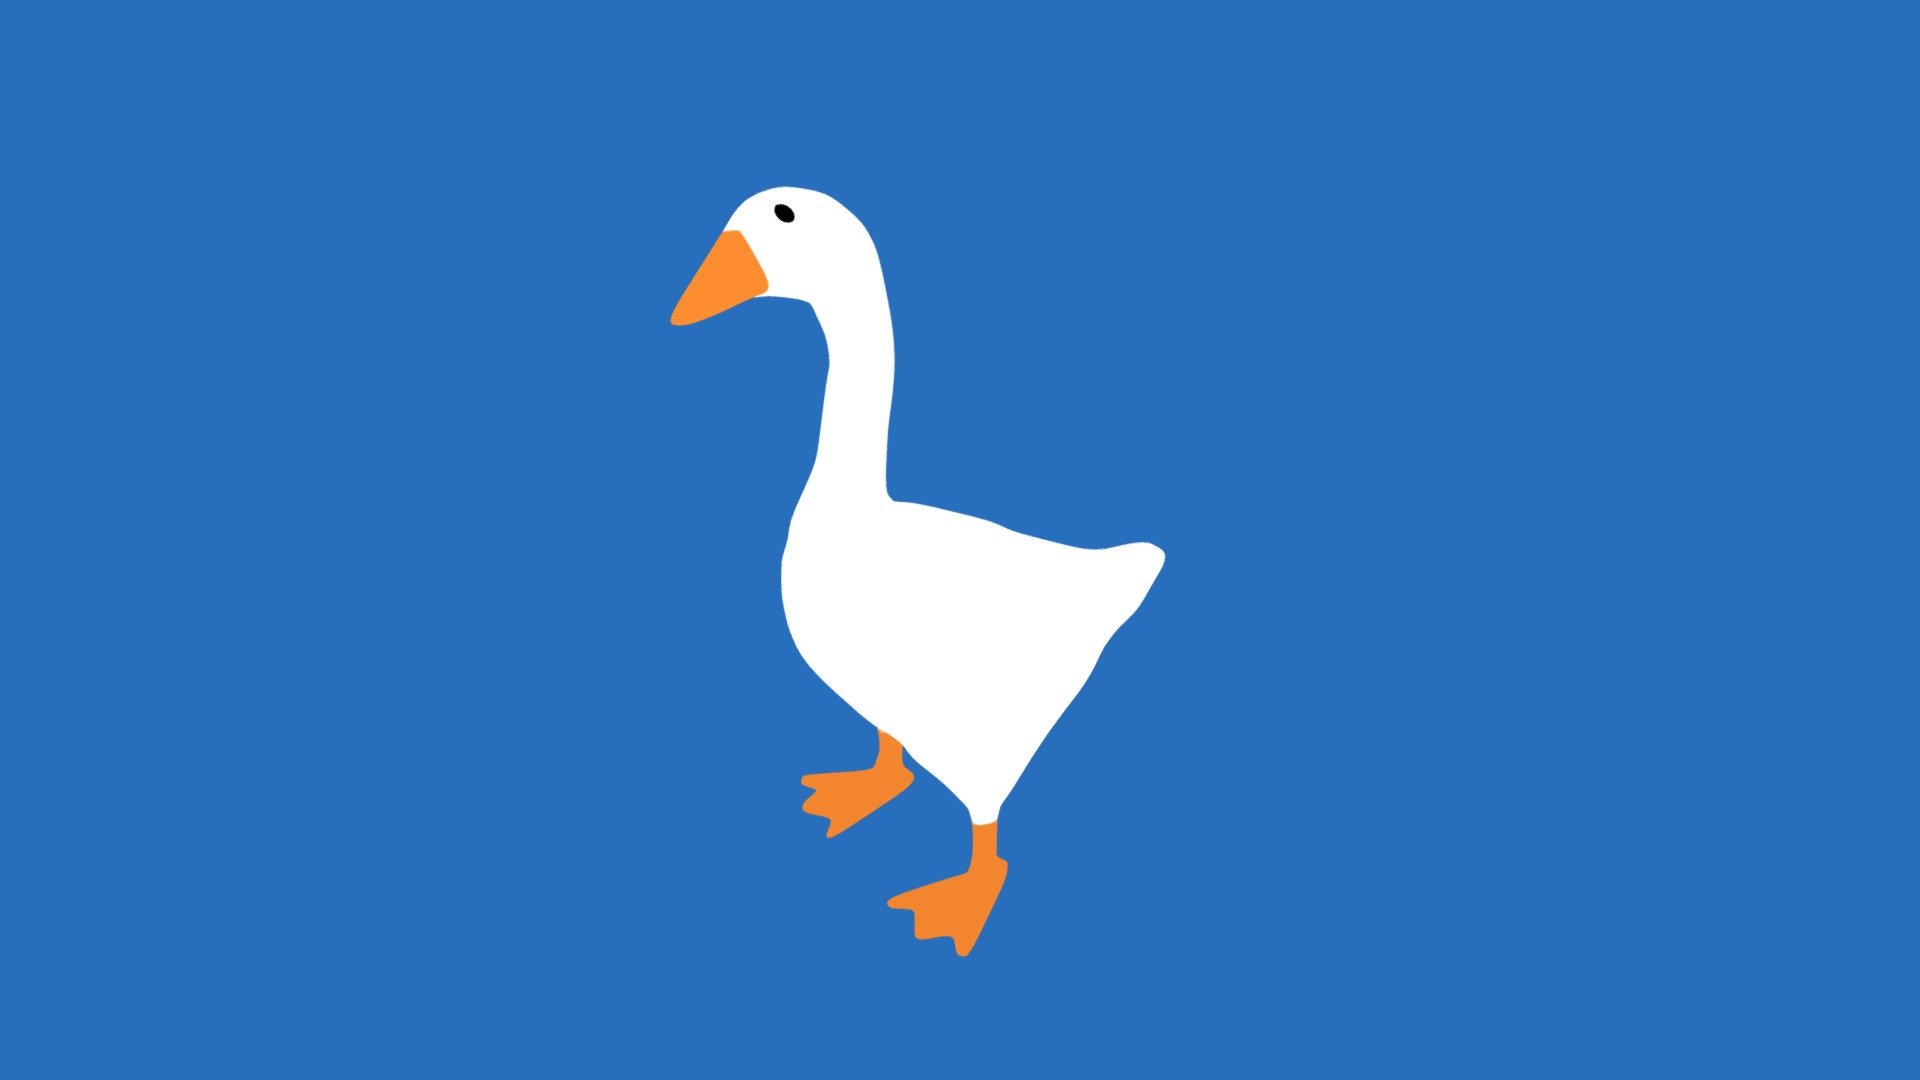 Untitled Goose Game - Download